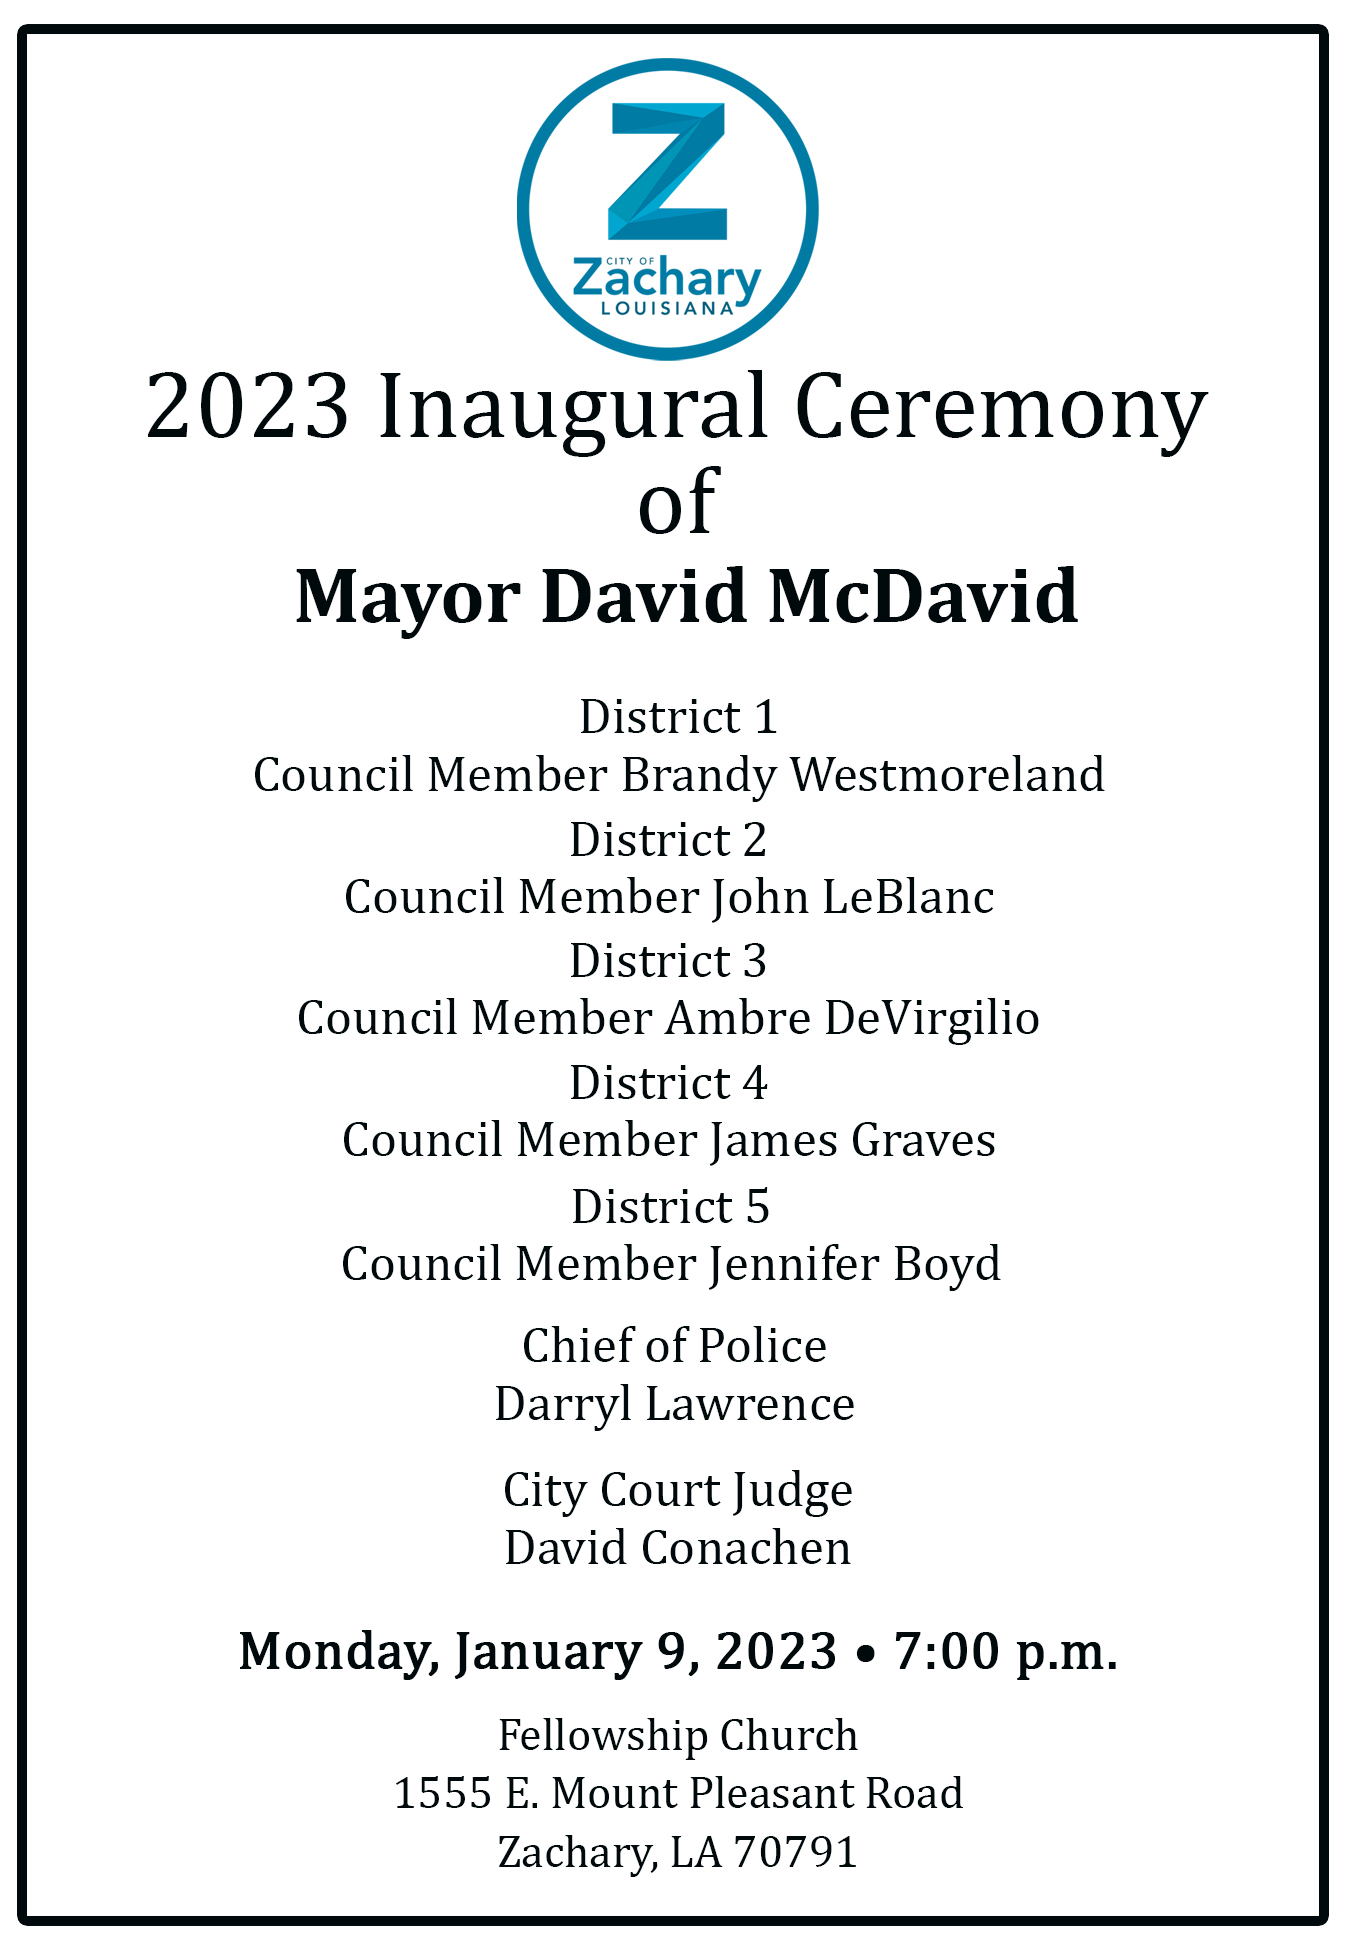 Inaugural Ceremony of Mayor, City Council Members, Chief of Police and City Court Judge Set for 1/9